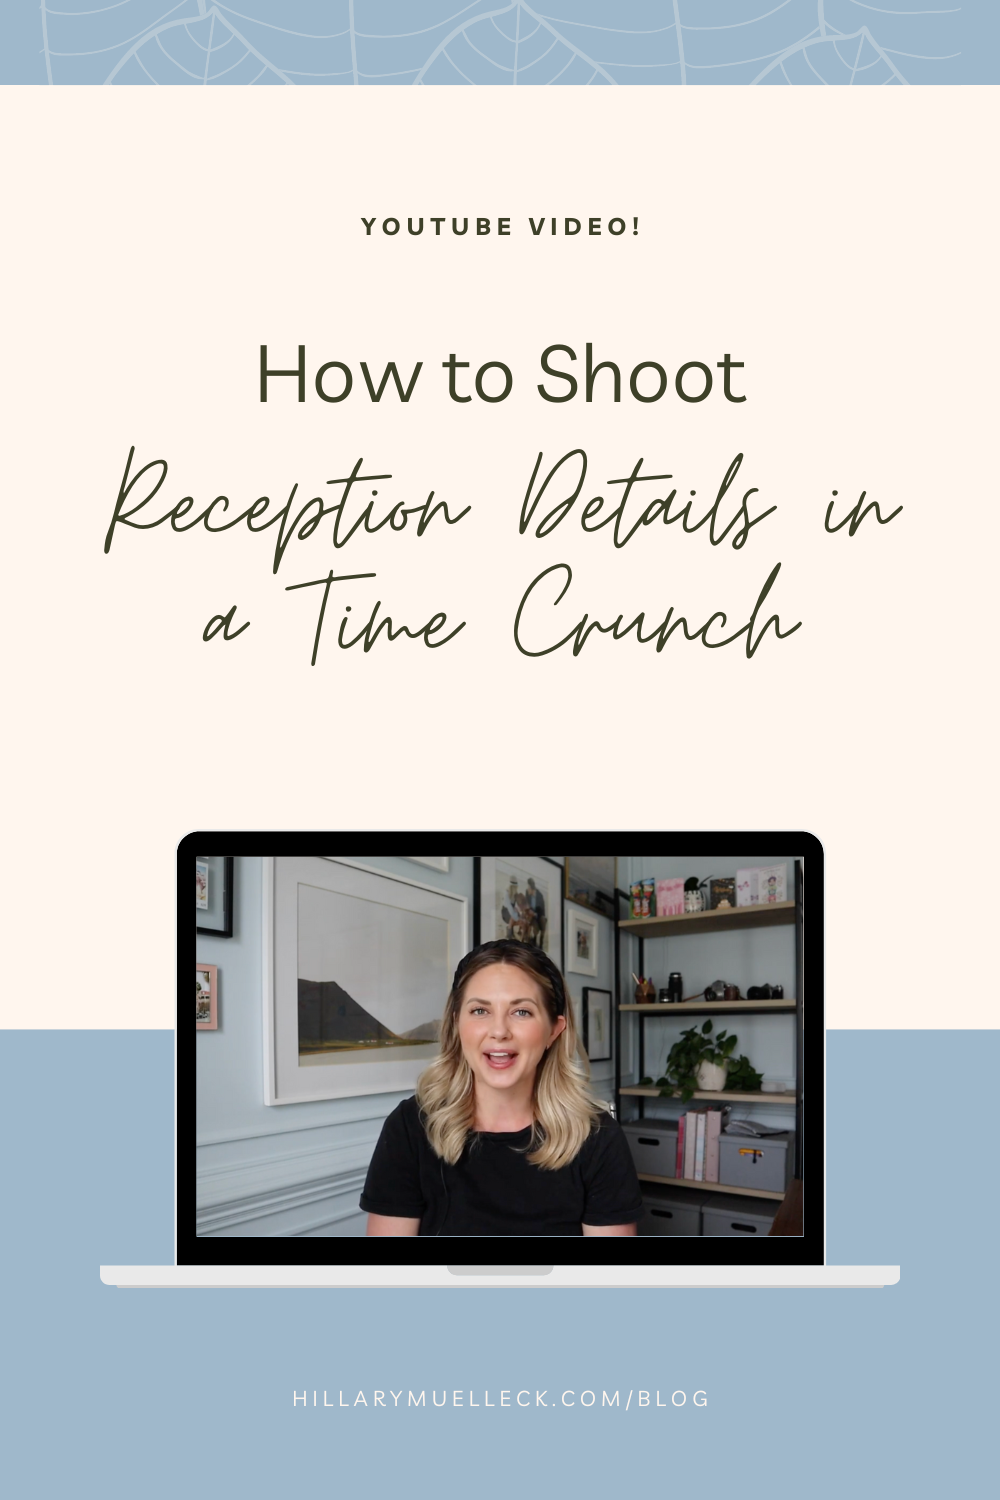 How to shoot reception details in a time crunch - wedding photographer Hillary Muelleck shares how to quickly capture the reception